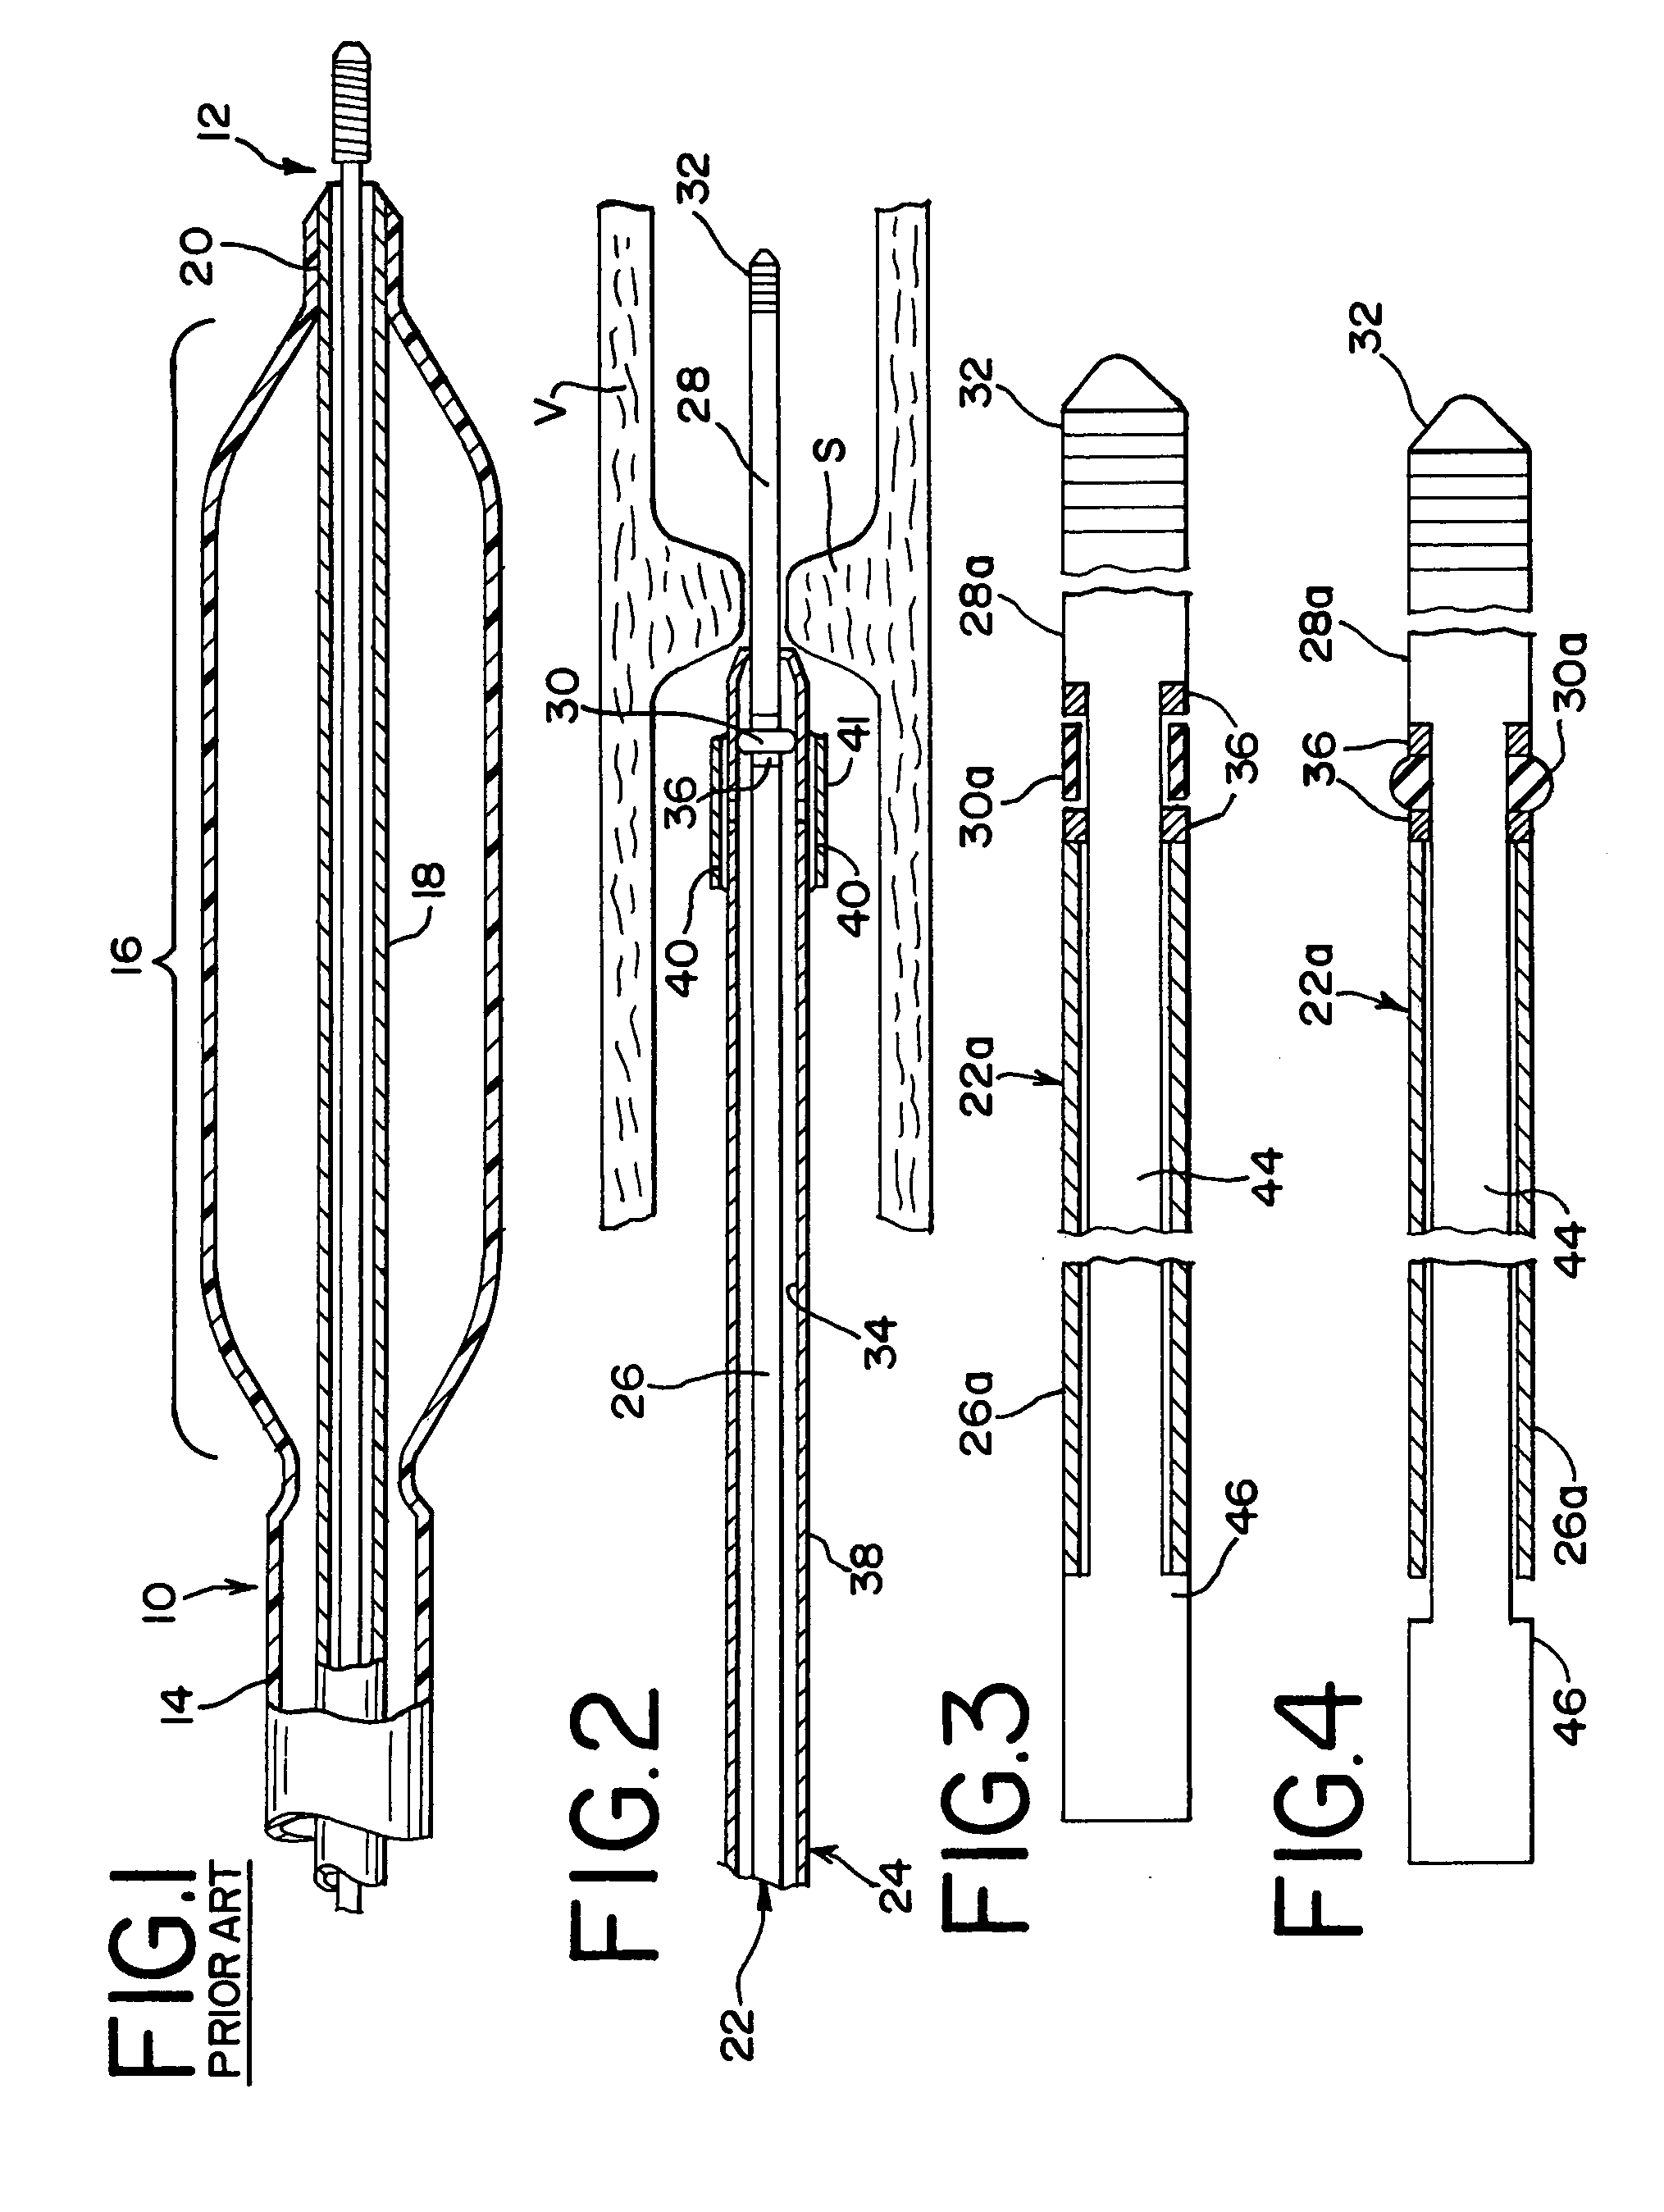 Guidewire with distal expansion feature and method for enhancing the deliverability and crossability of medical devices